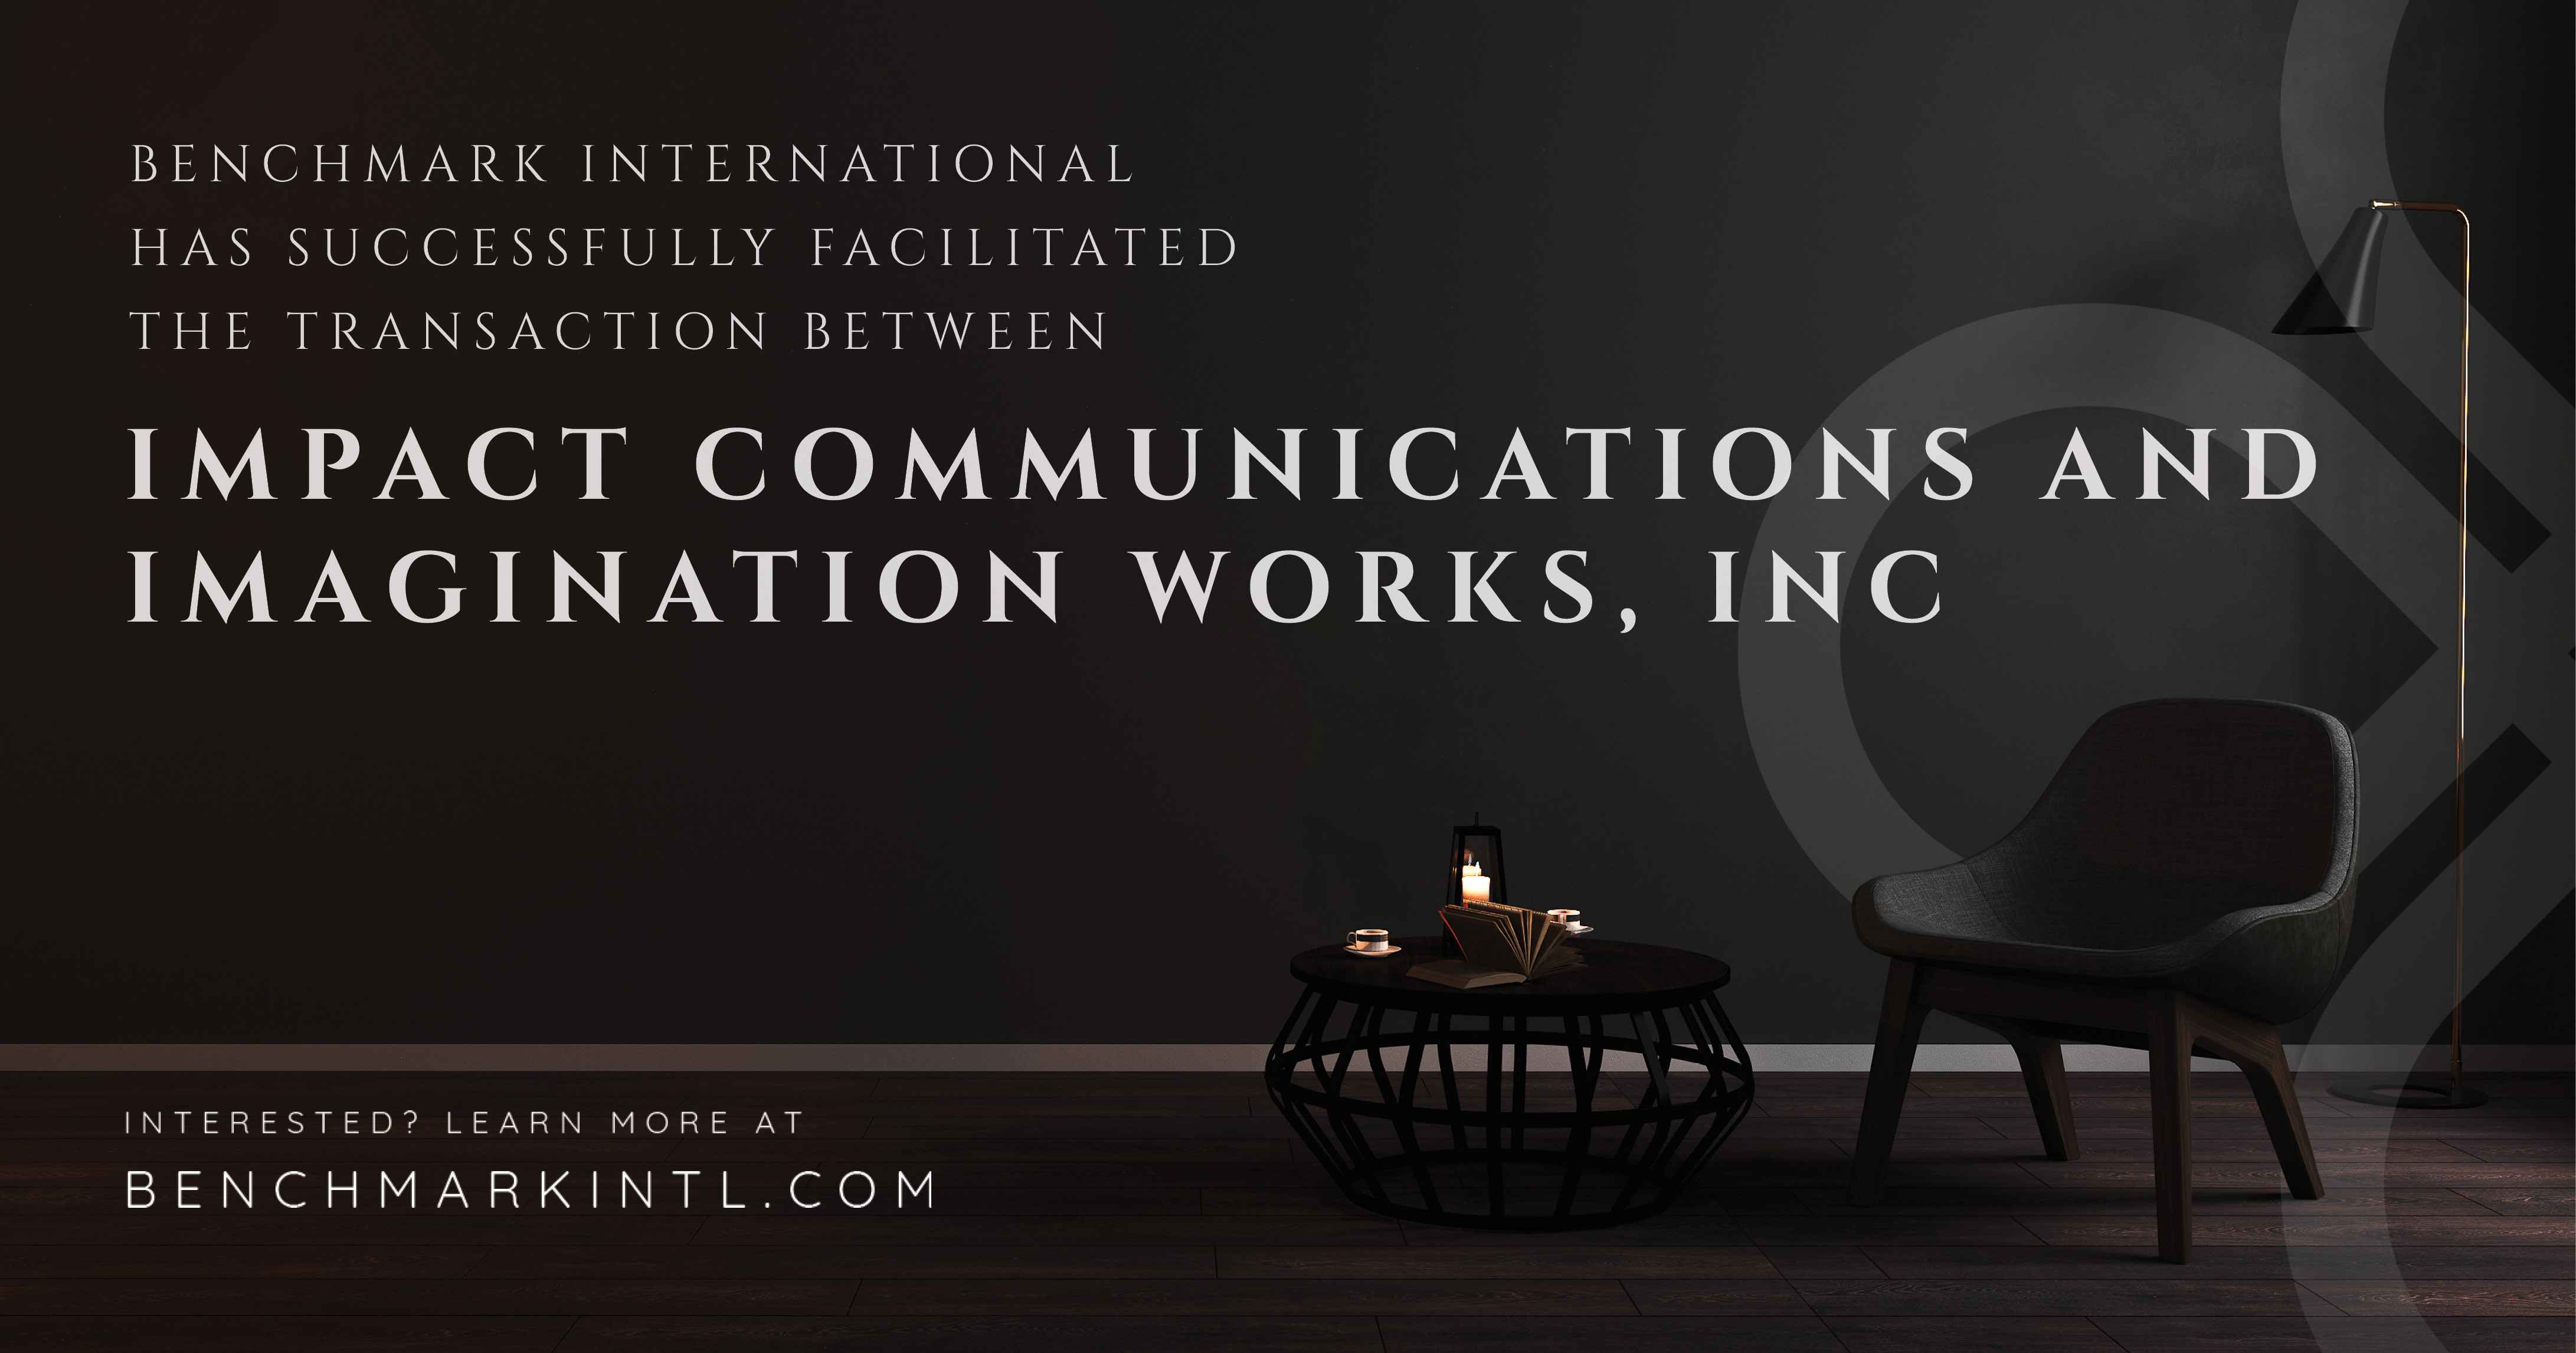 Benchmark International Facilitated The Transaction Between Impact Communications And Imagination Works, Inc.